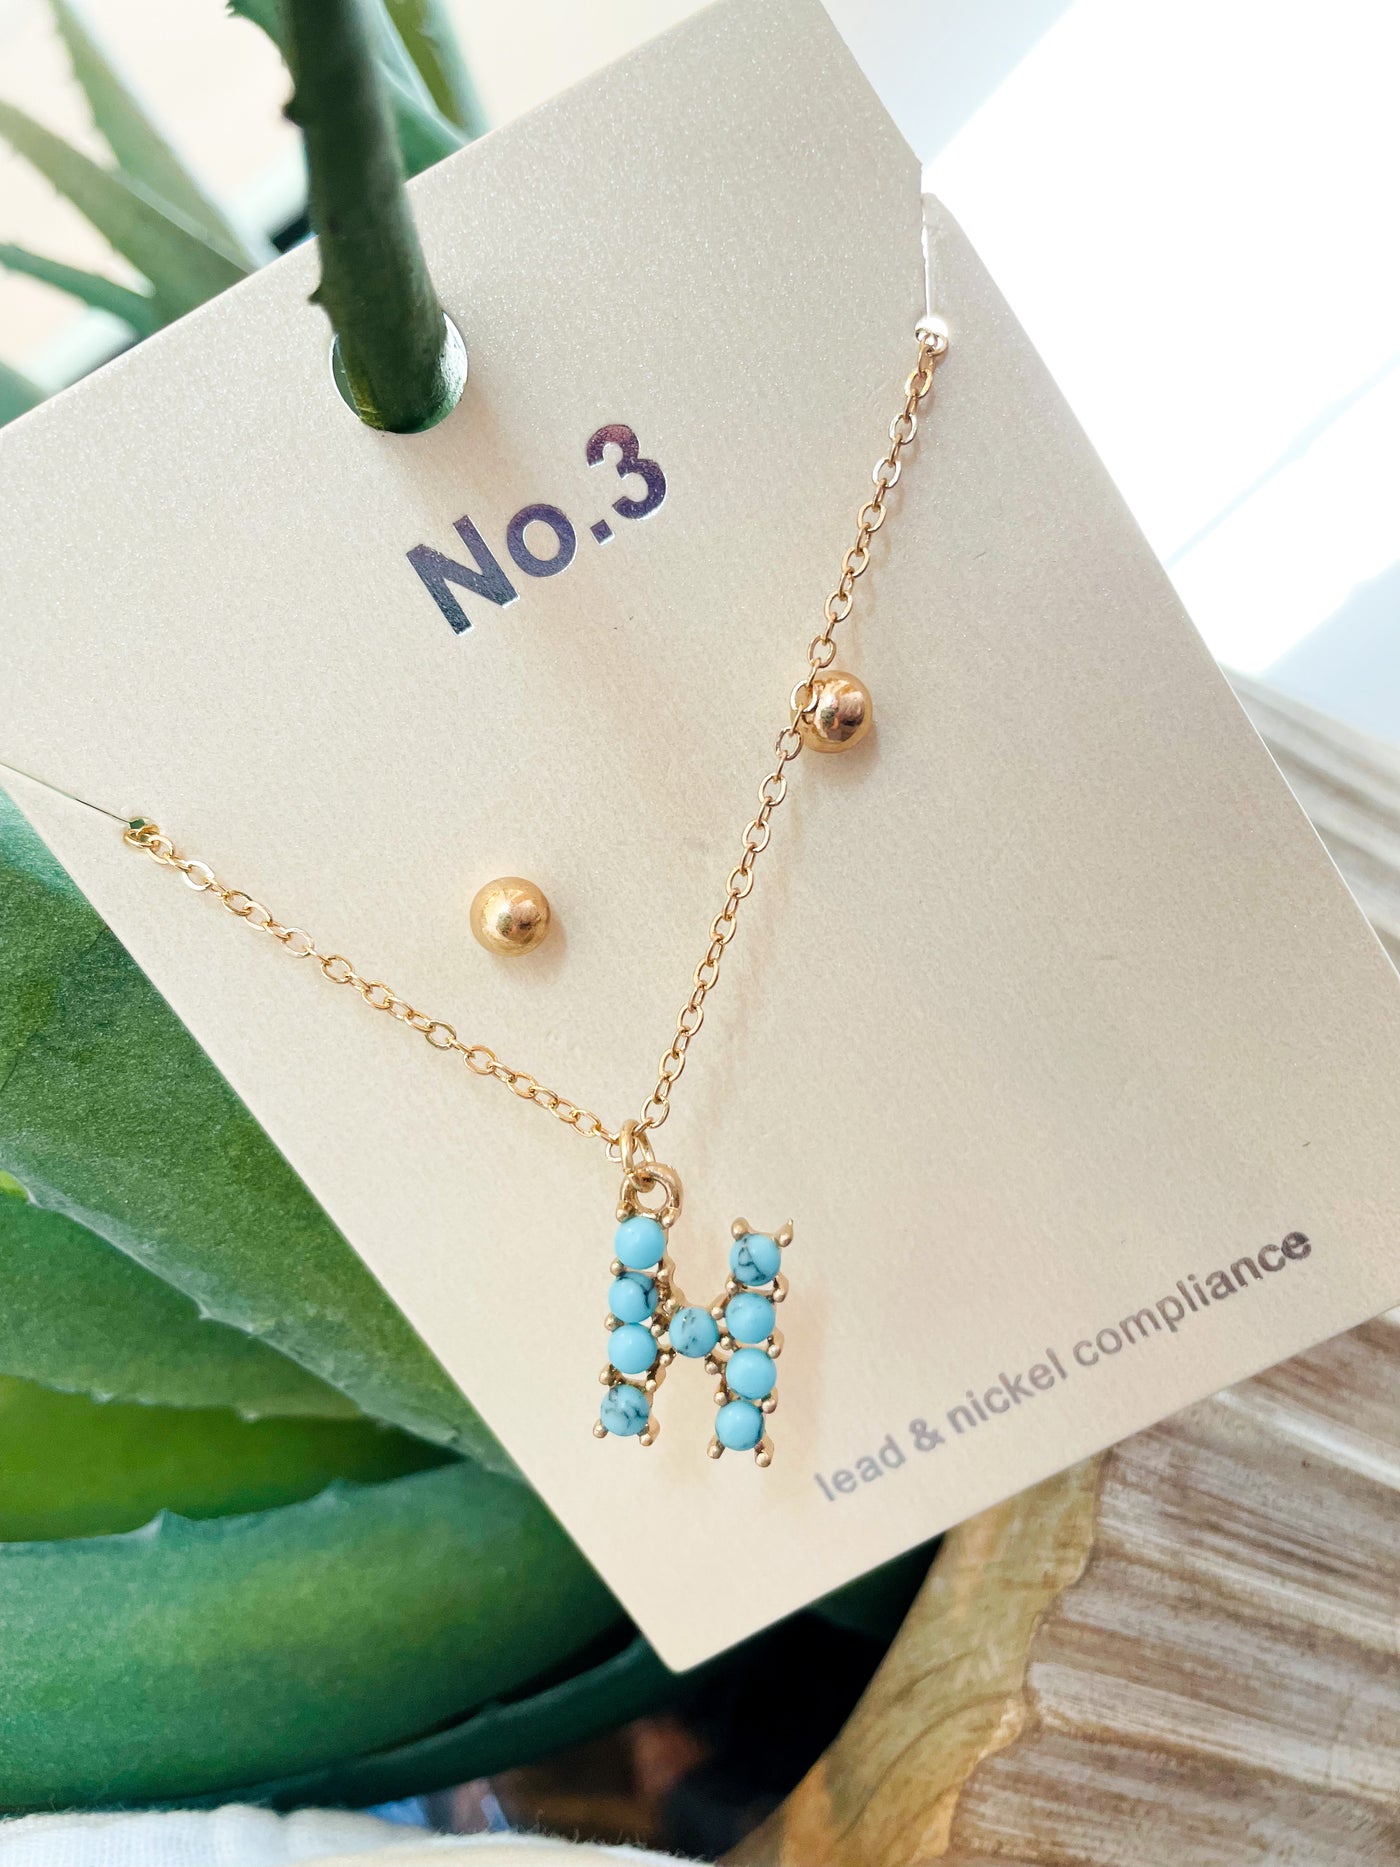 The Rockin' Turquoise Initial Necklaces